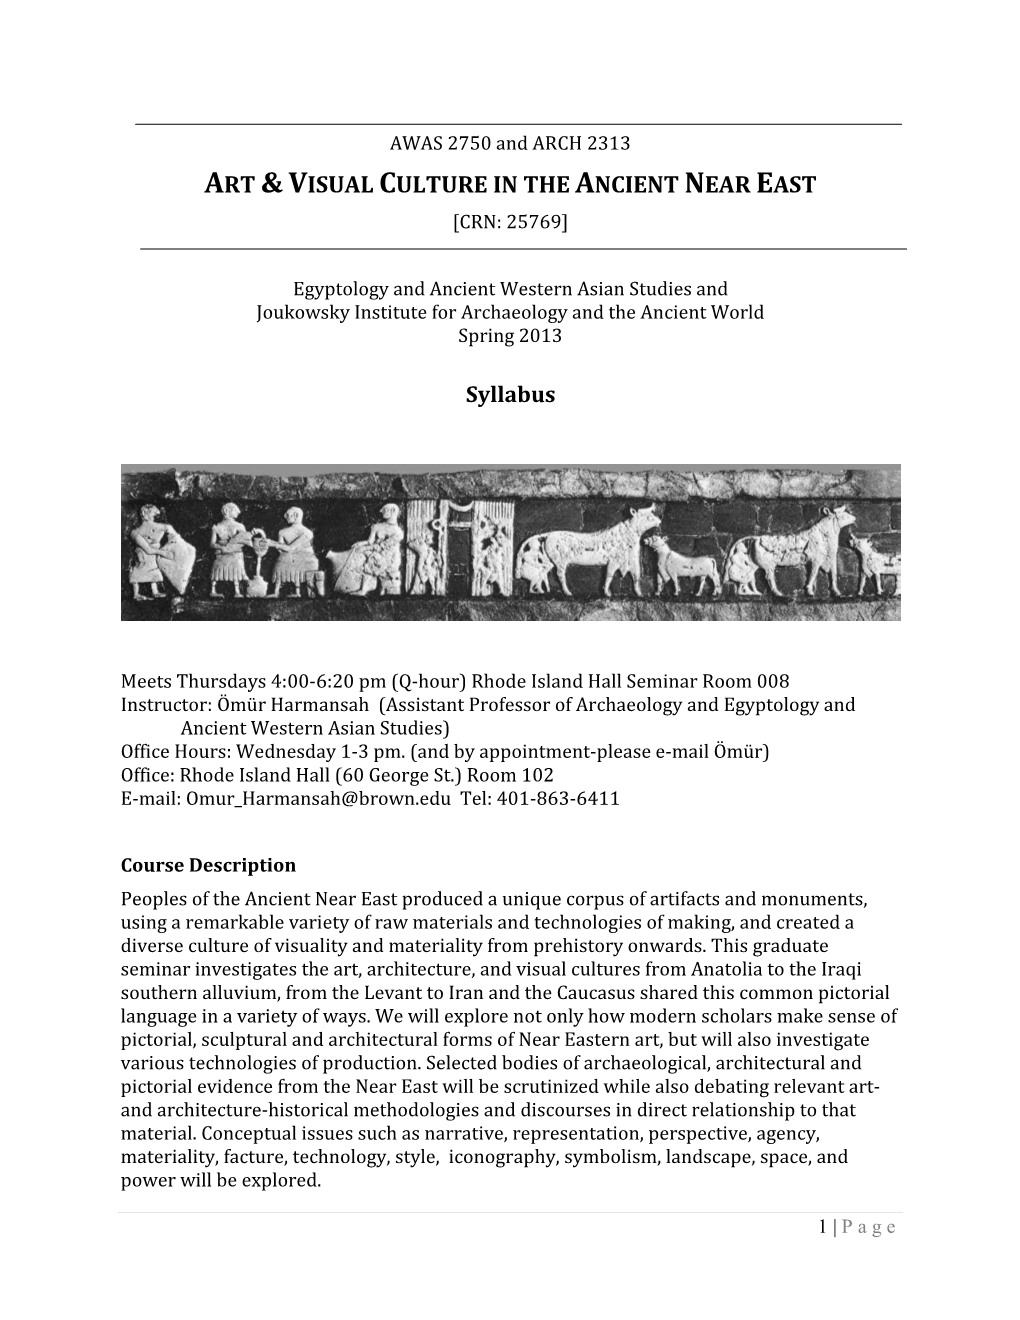 Art &Visual Culture in the Ancient Near